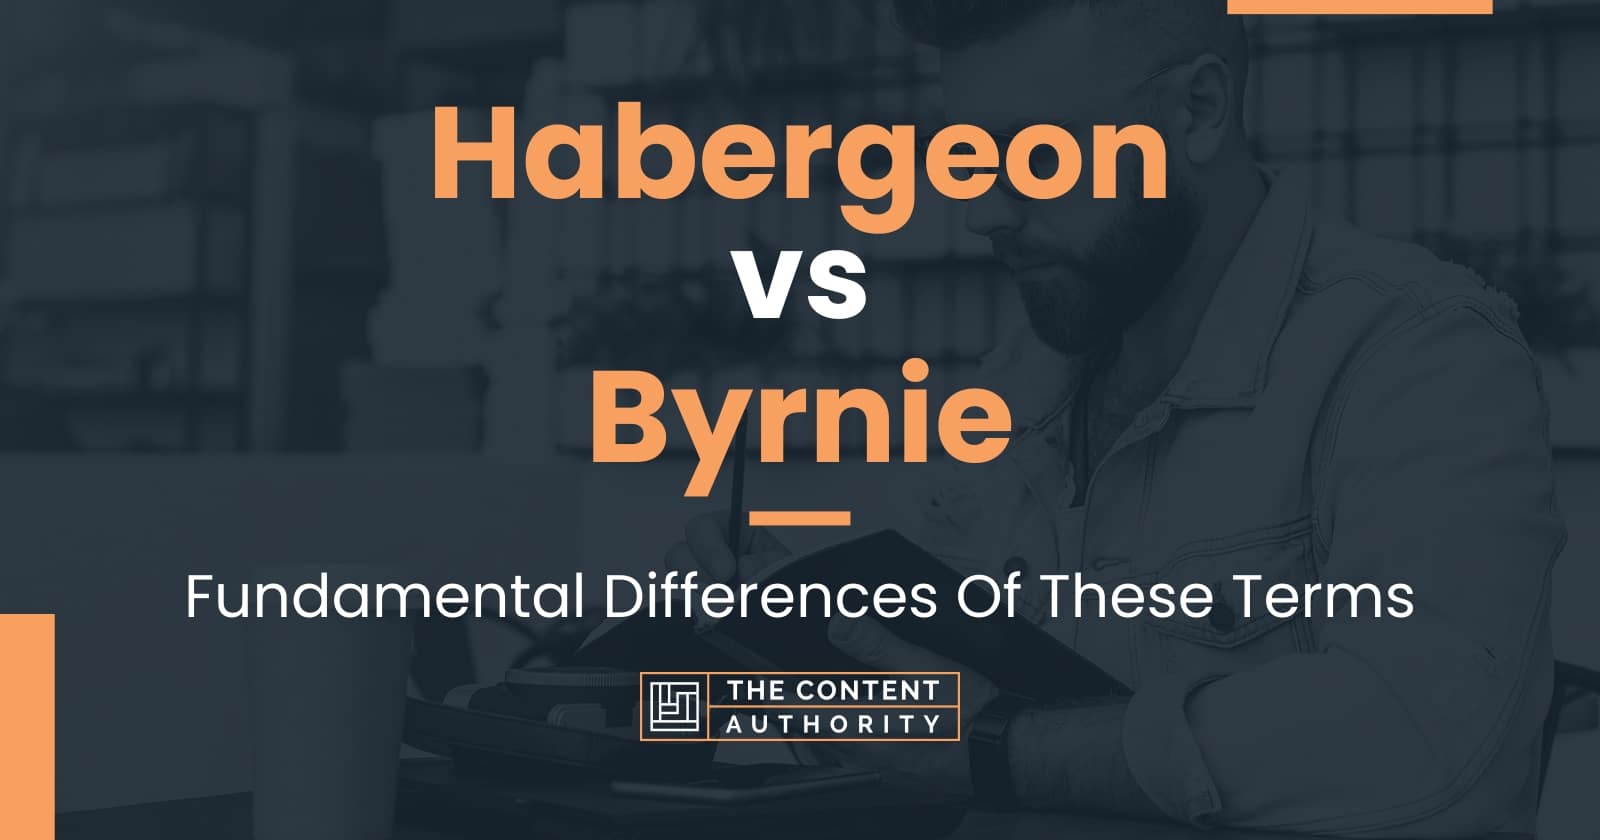 Habergeon vs Byrnie: Fundamental Differences Of These Terms